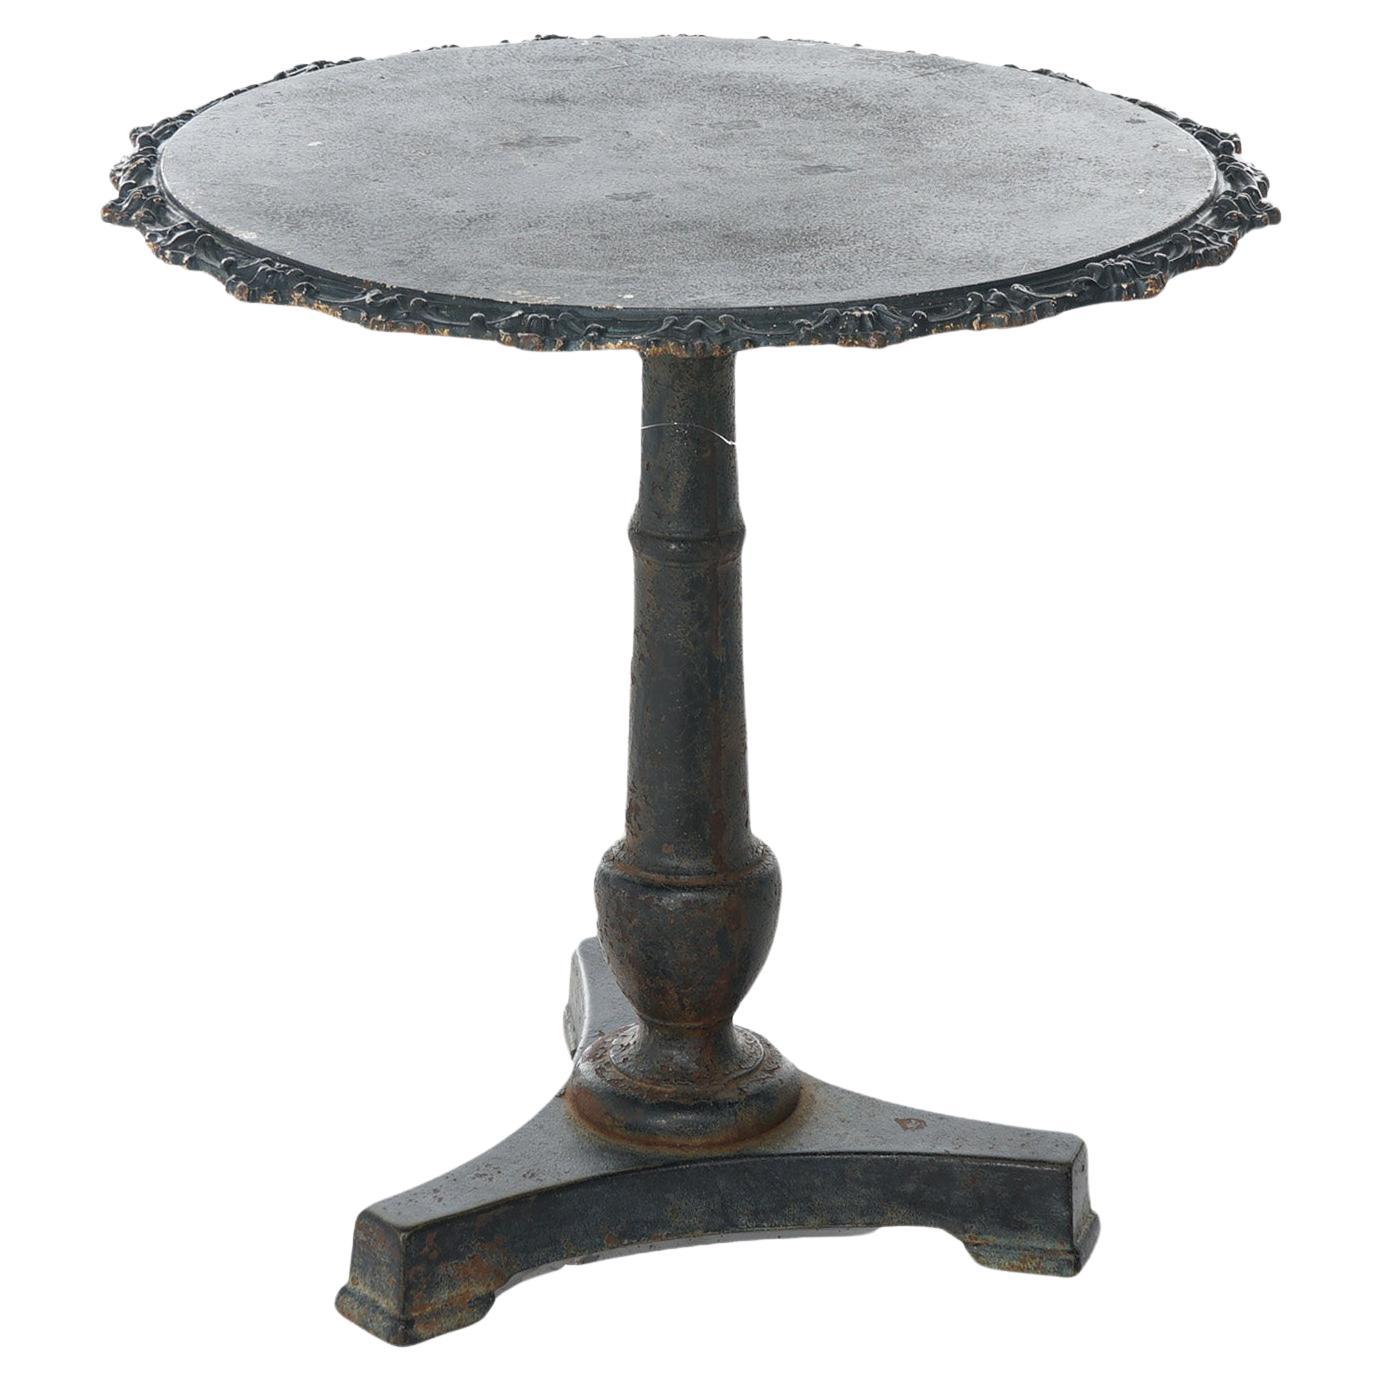 Antique Neoclassical Cast Iron Café Garden Table by Rudy Groeger Foundry 19thC For Sale